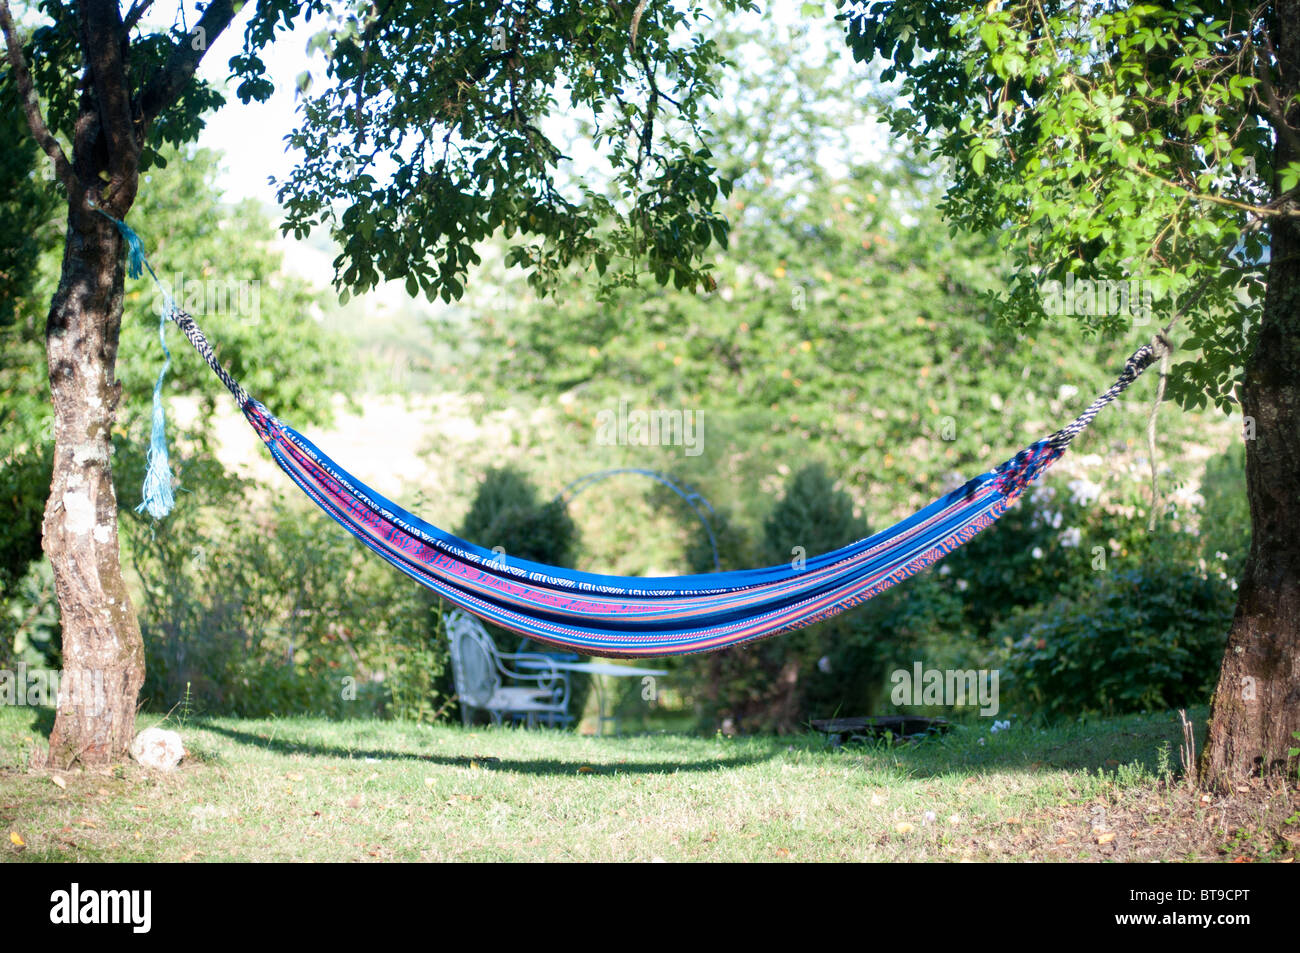 A hammock between two trees in a garden Stock Photo